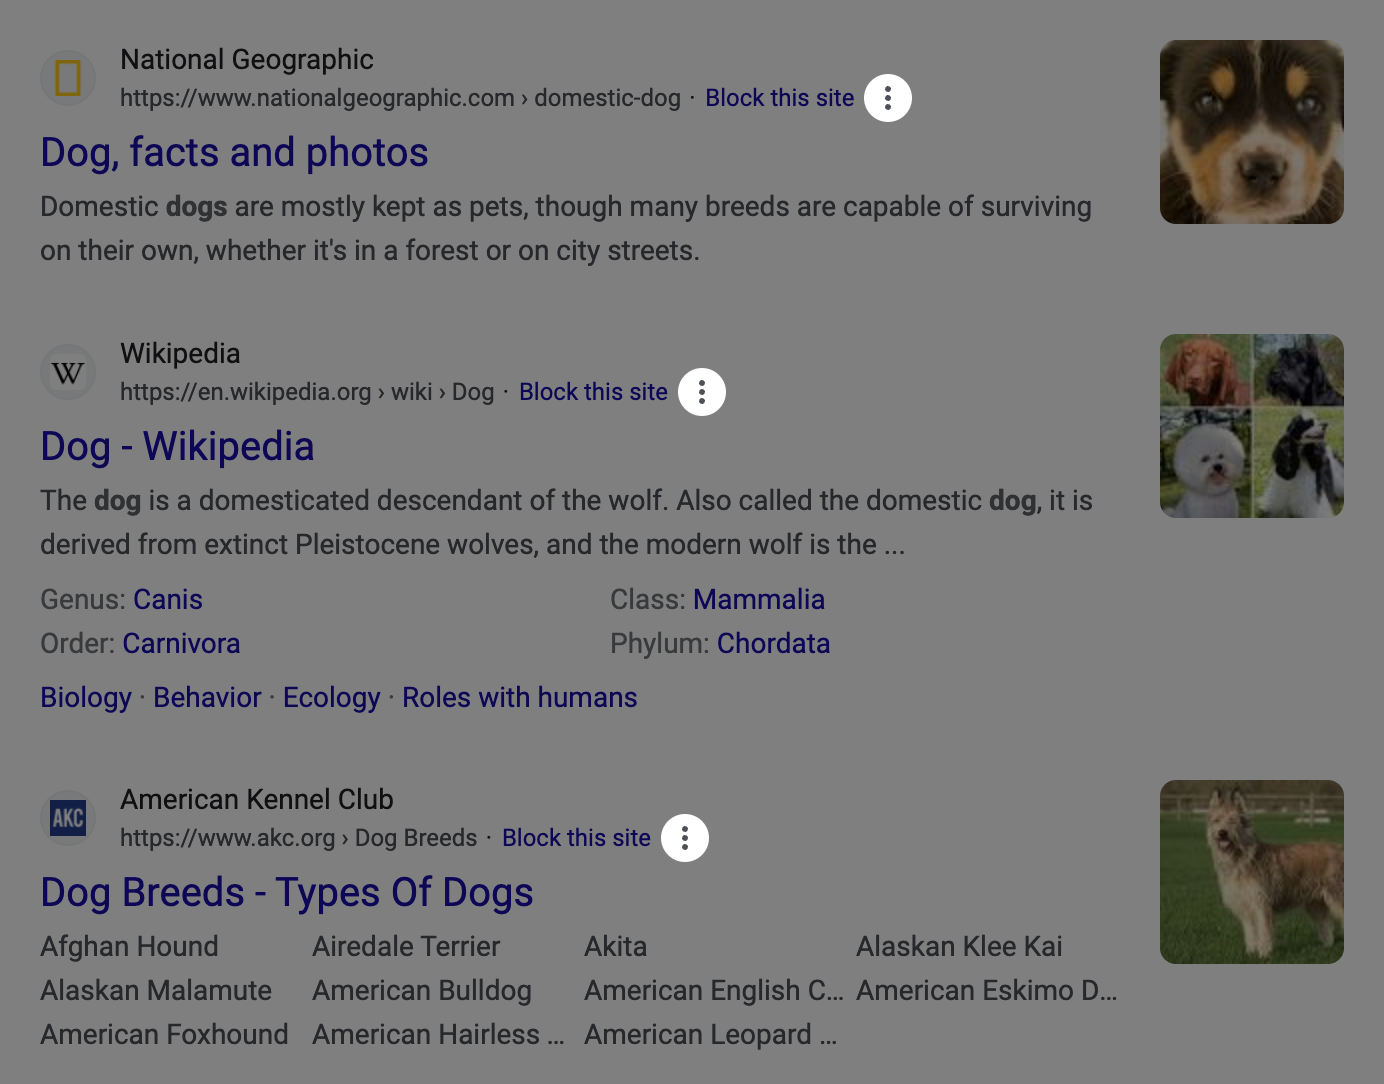 Three Google search result entries. The first result is for National Geographic and has a title of, 'Dog, facts and photos'. The second result is for Wikipedia, and has a title of, 'Dog - Wikipedia'. The third result is for American Kennel Club and has a title of 'Dog Breeds - Types Of Dogs'. Each result also lists the URL linked to under the title of the site. After each URL is also a link to block the site, and then an icon that consists of three vertically-stacked dots. A filter of 50% transparent black has been applied to the entire image, with a cutout circle centered around the each of the icons, to draw the reader's attention to them. Cropped screenshot.